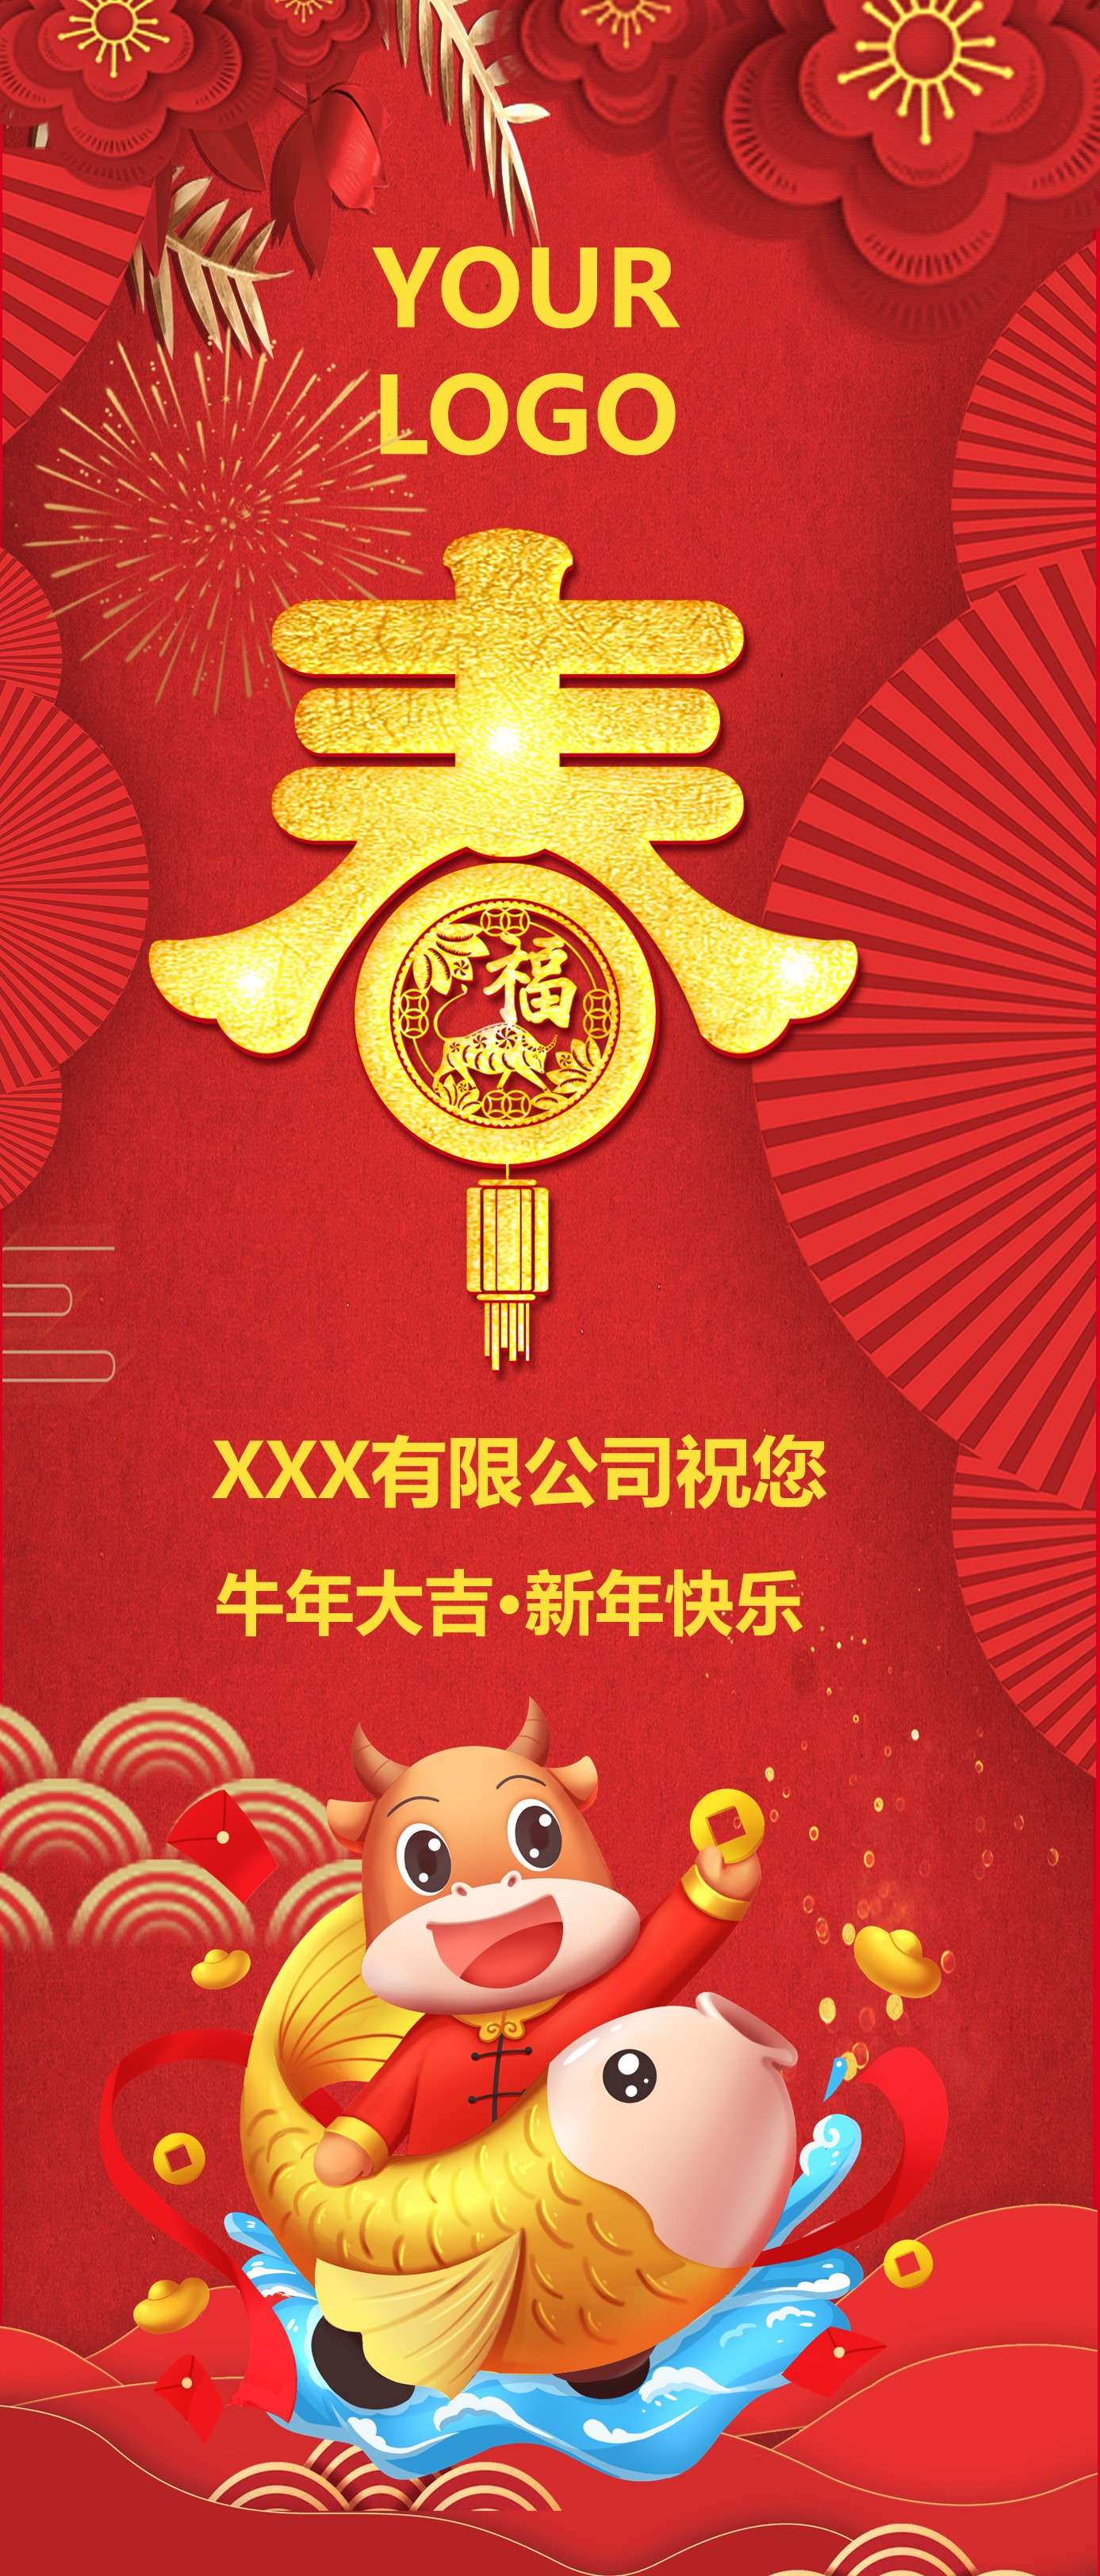 2020 Chinese style festive red year of the rat good luck company promotional greeting card PPT template